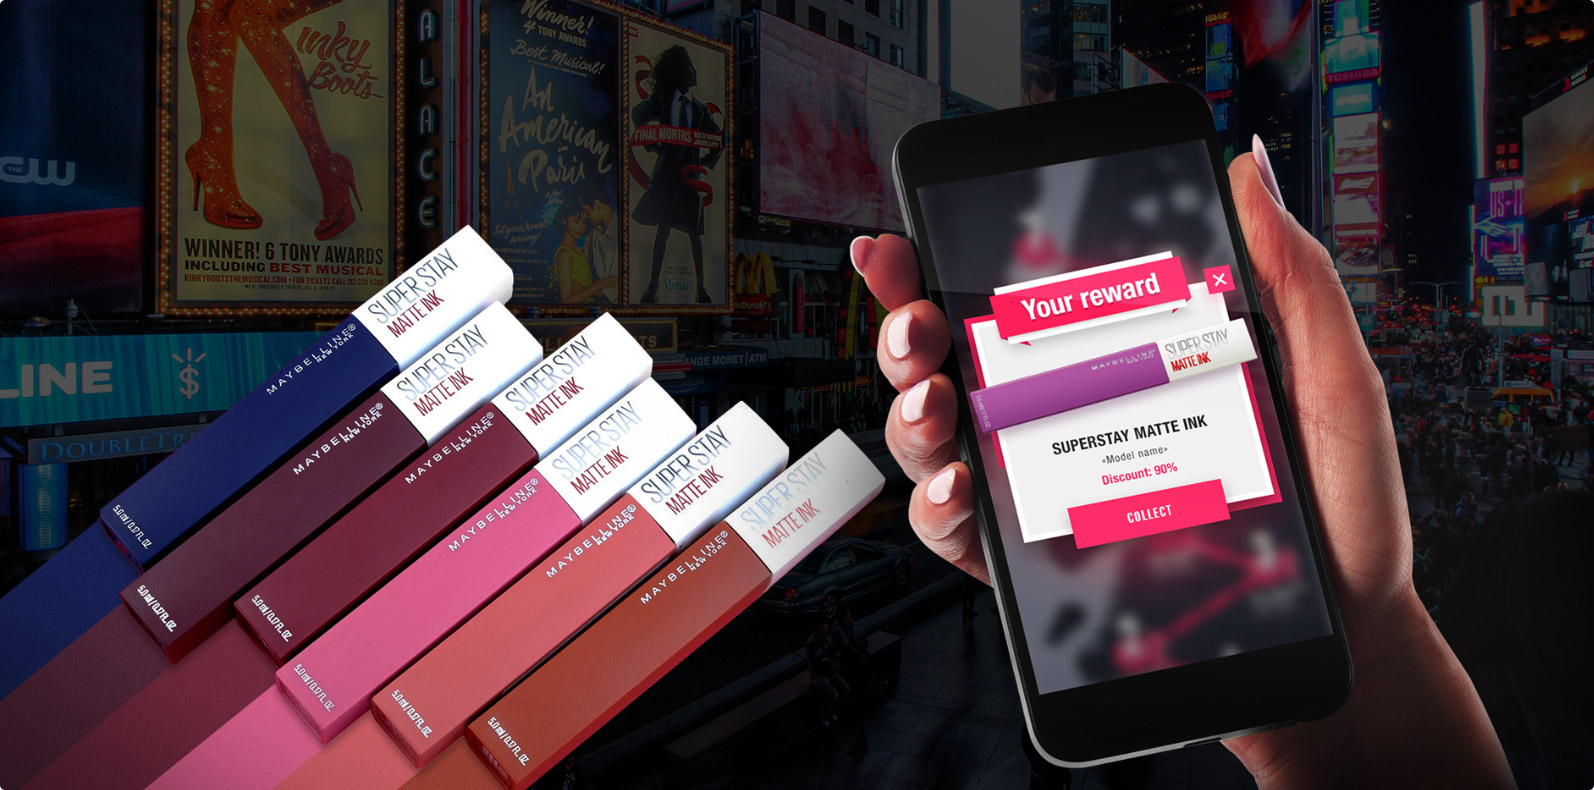 Match the Ink web-based game for Maybelline New York